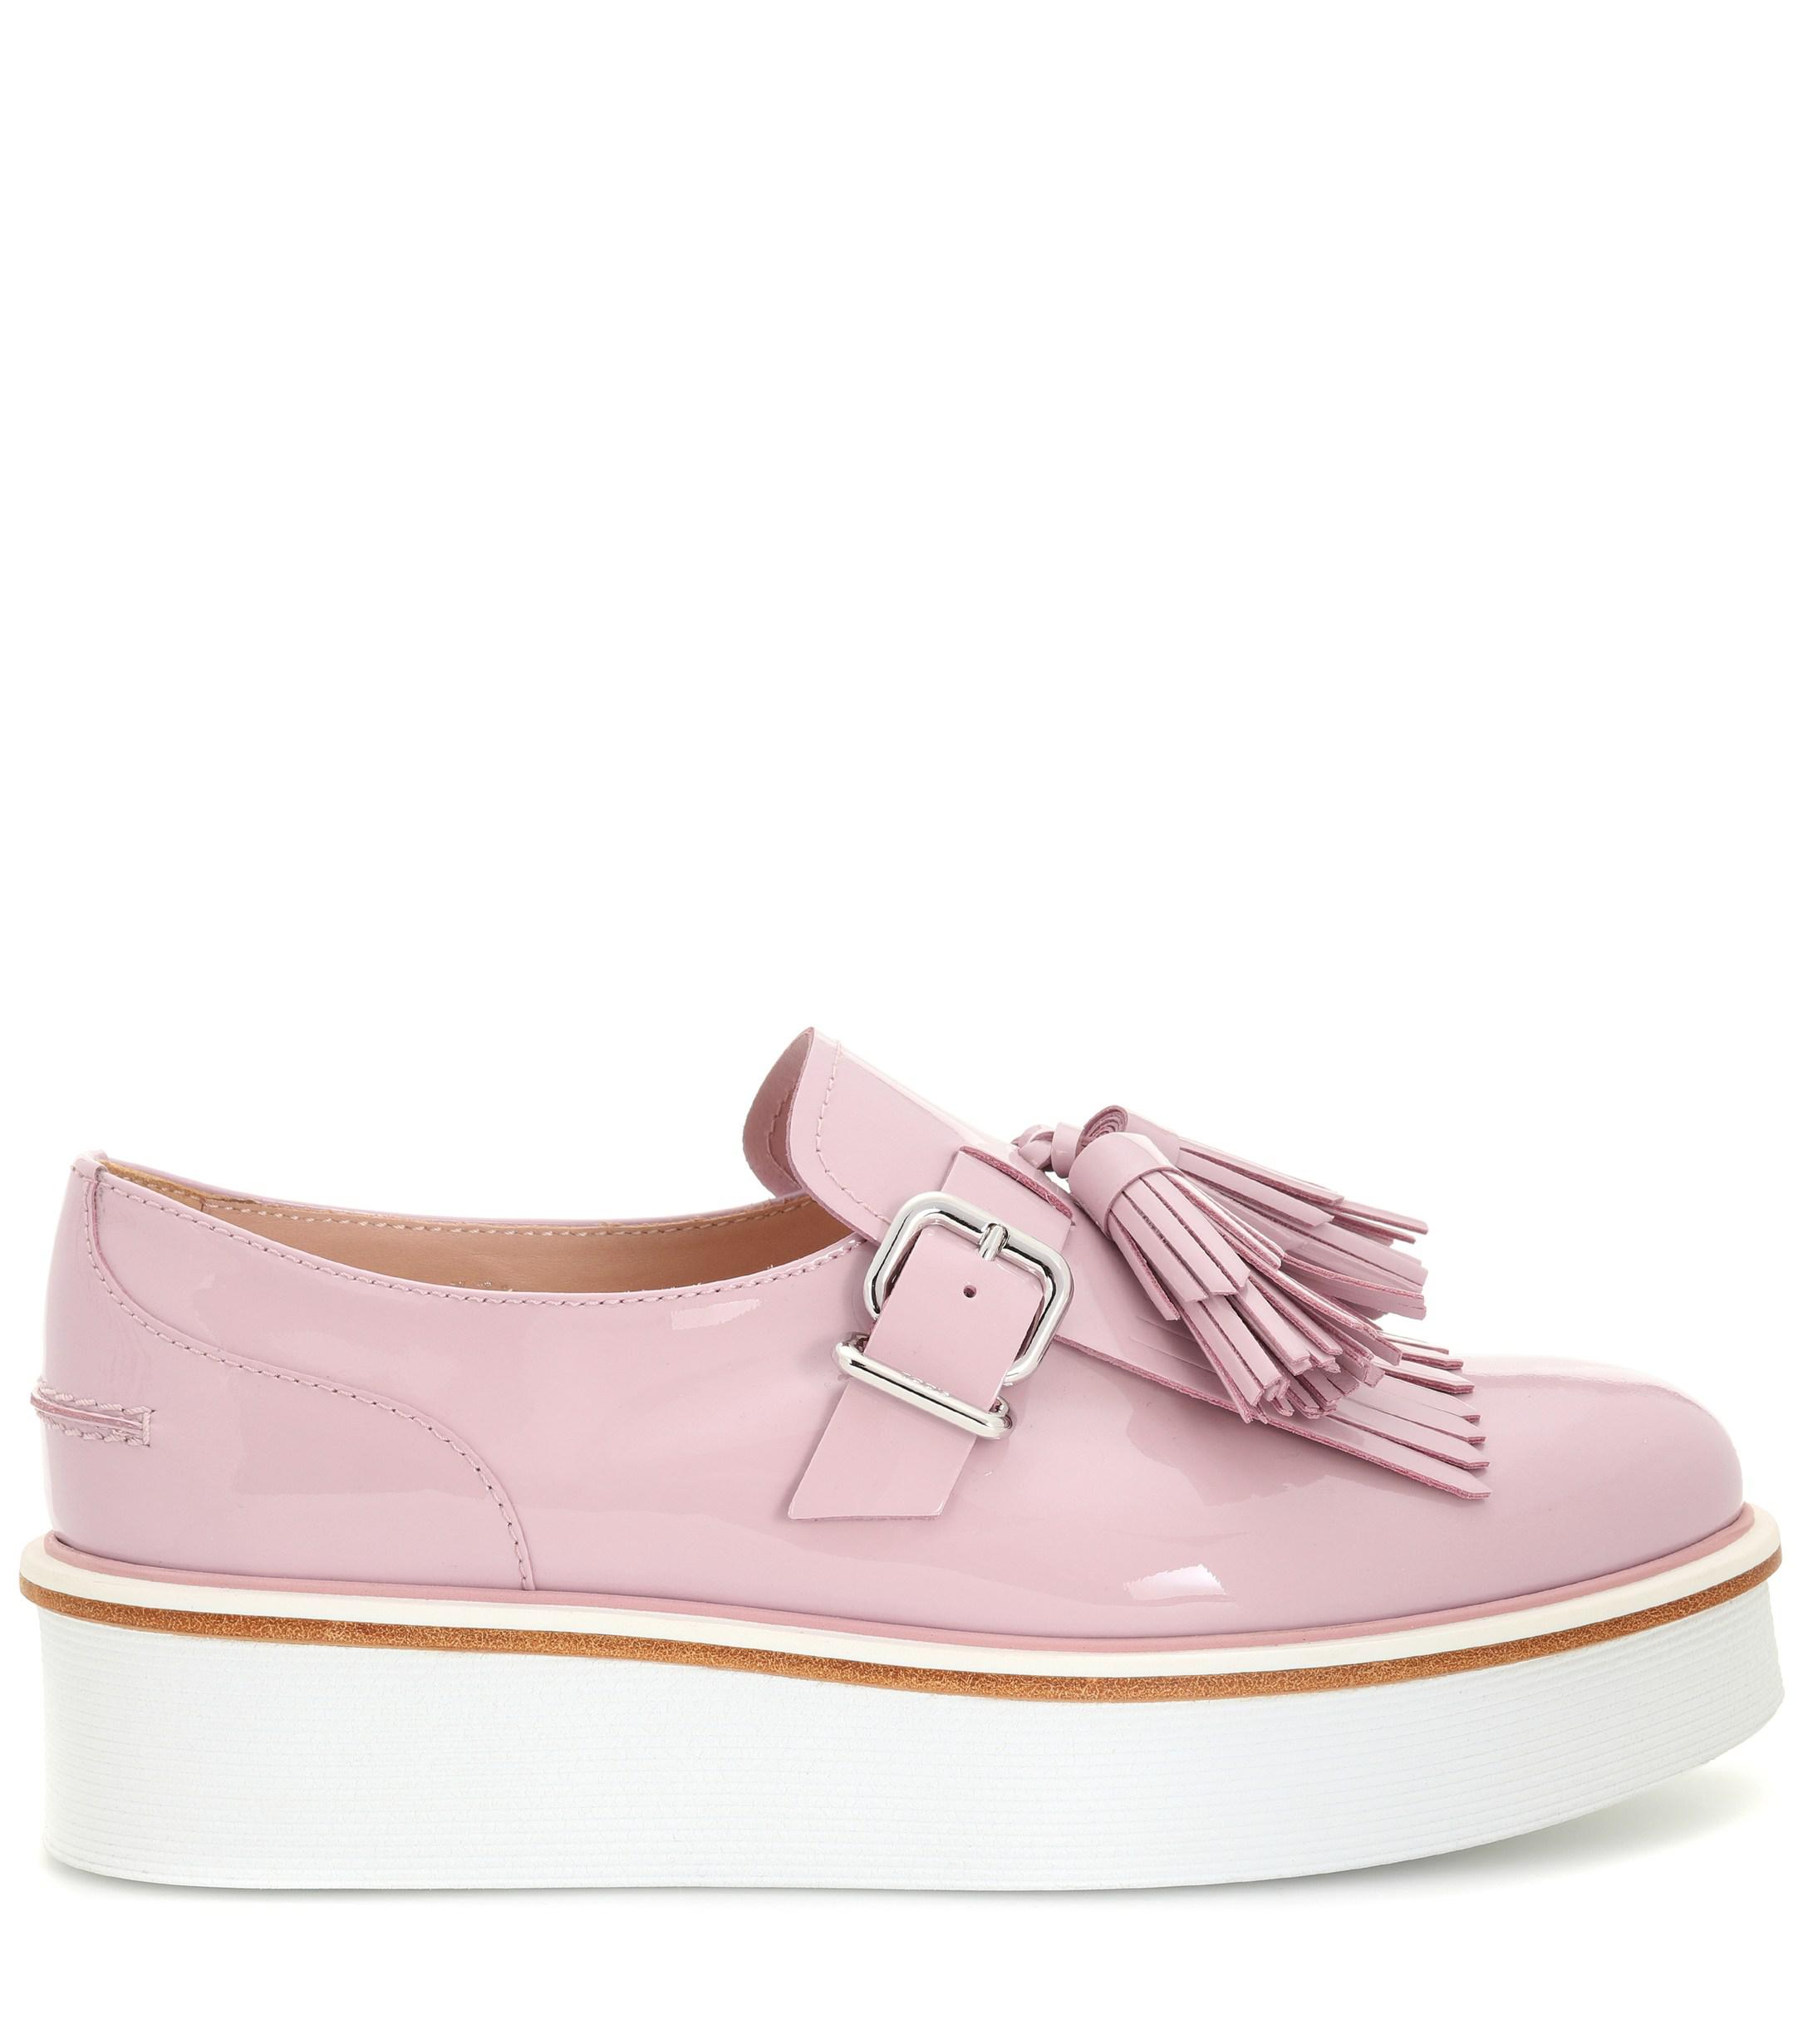 Tod's Leather Platform Loafers in Pink - Lyst